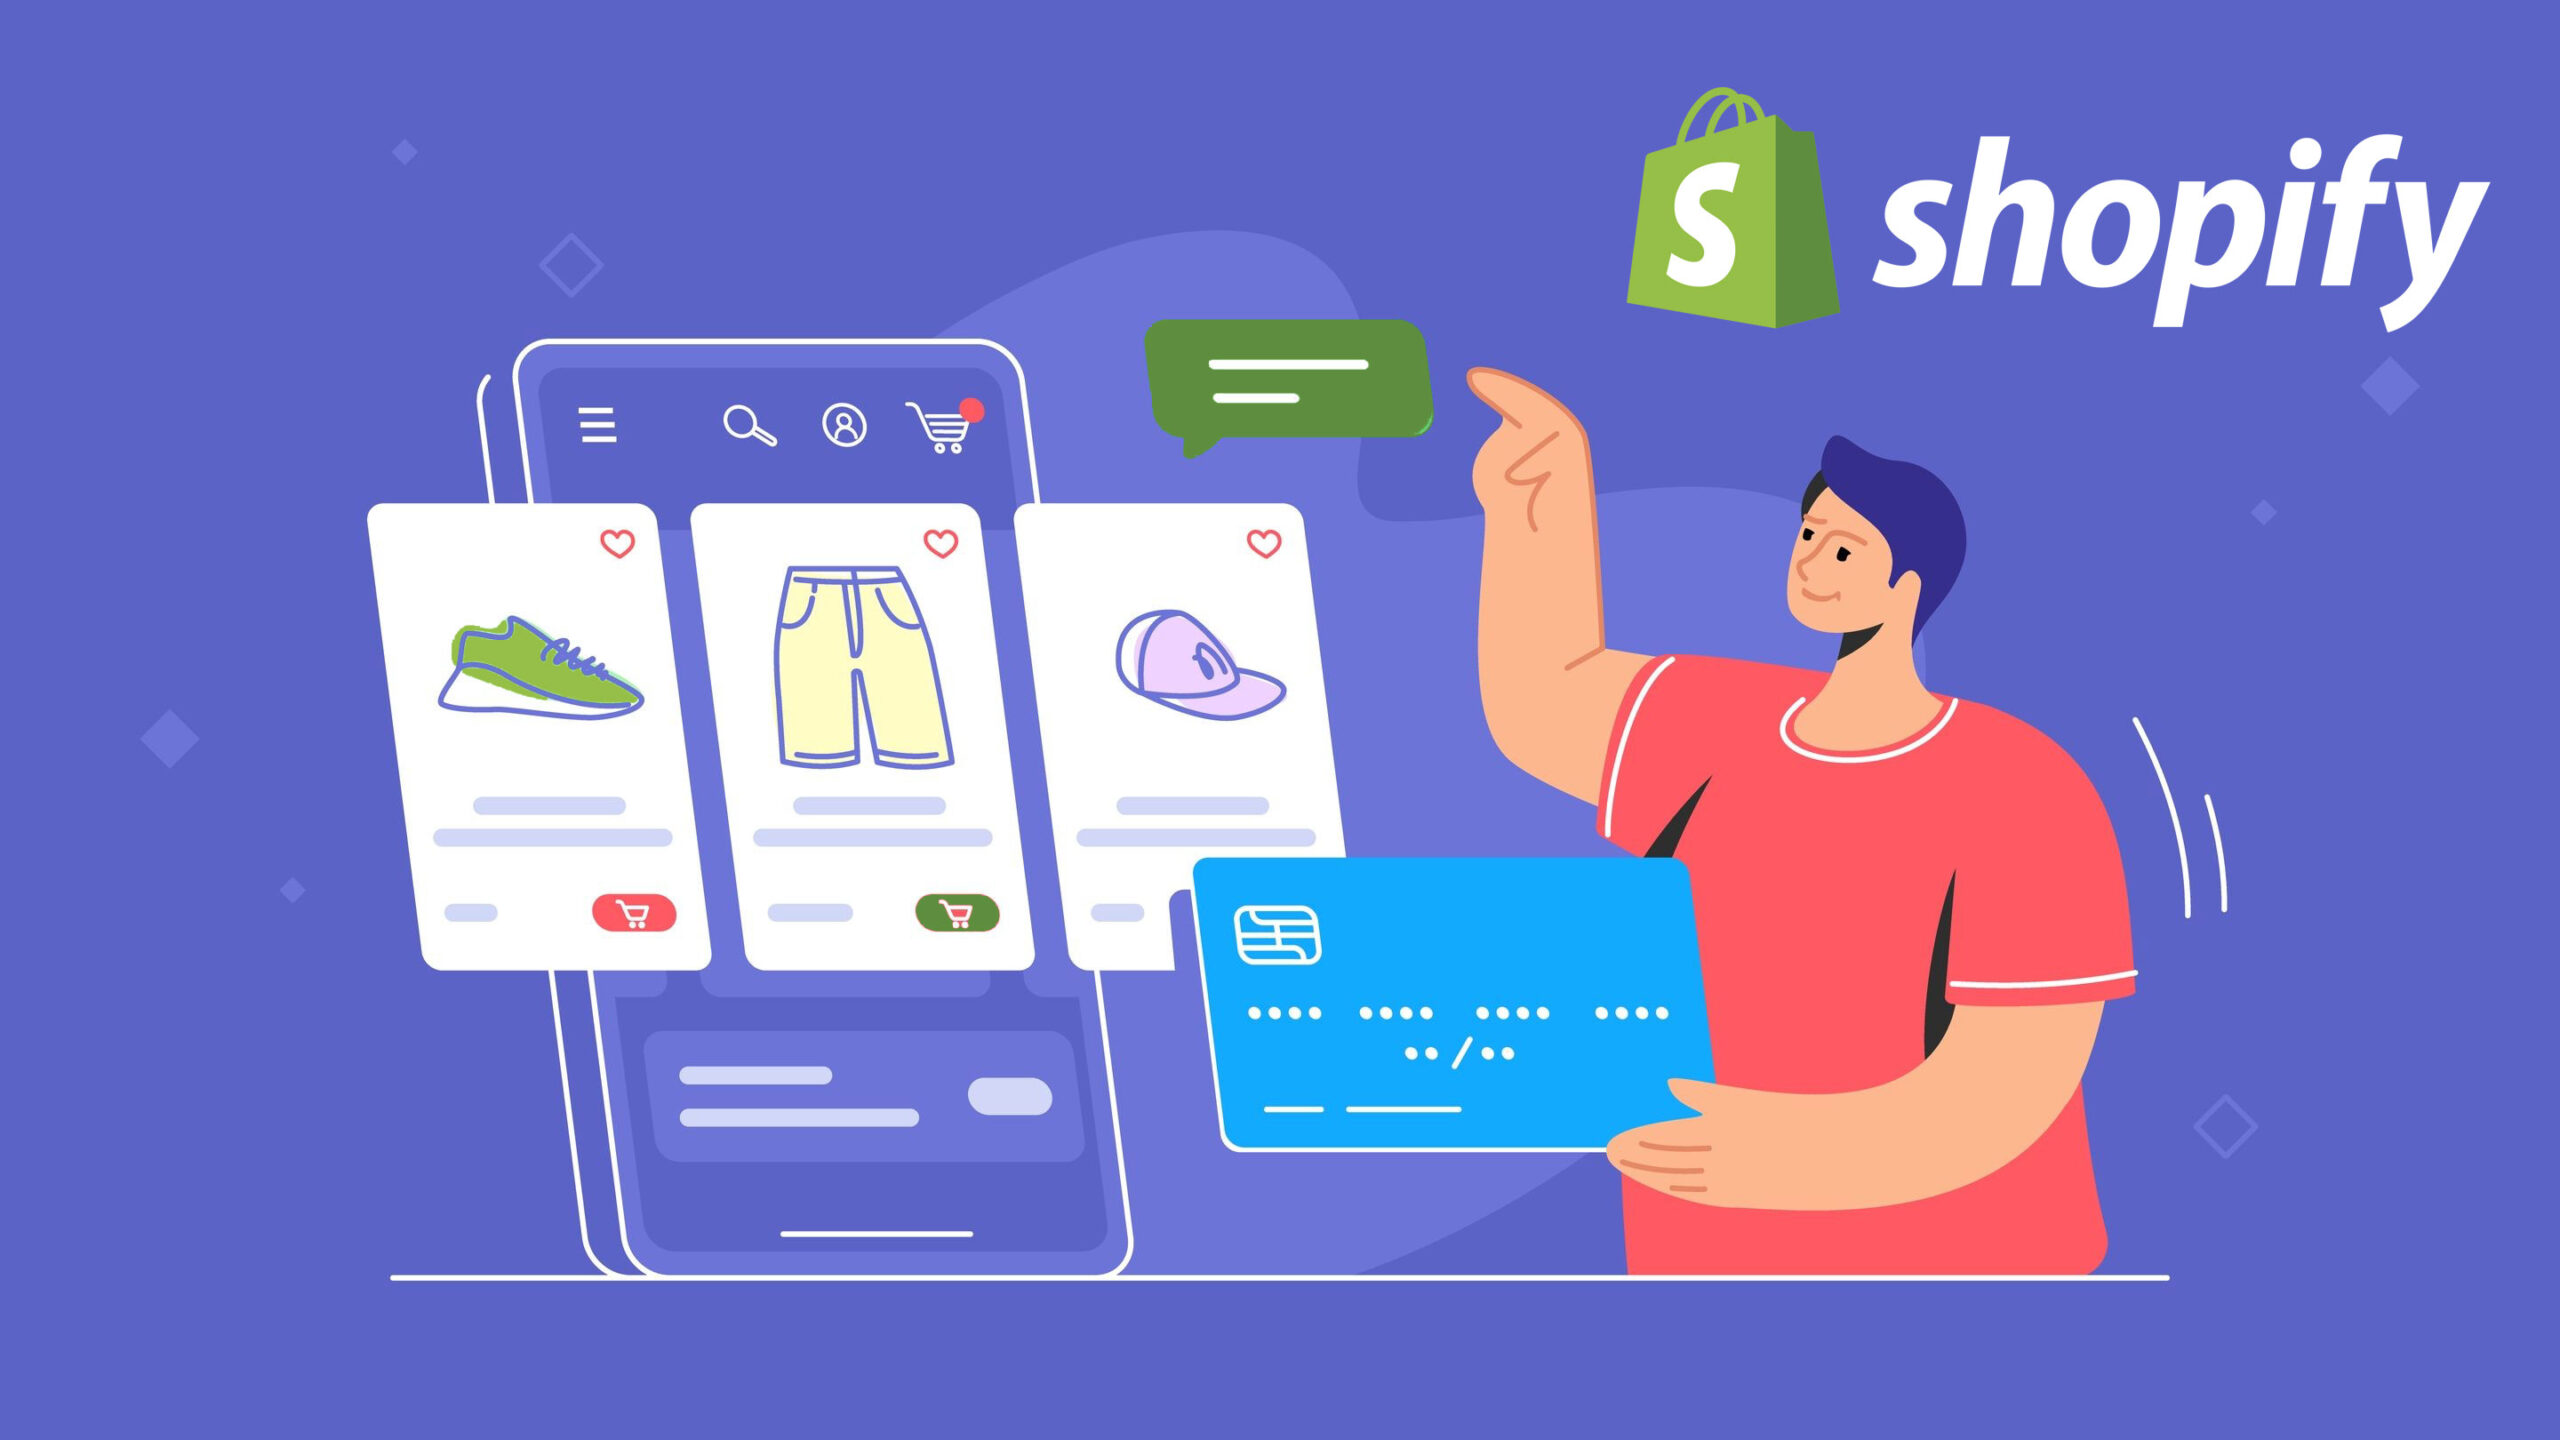 Flat line vector illustration of young man holding blue credit card and pointing to the online e-store web cart with goods on smartphone screen with Shopify logo in corner